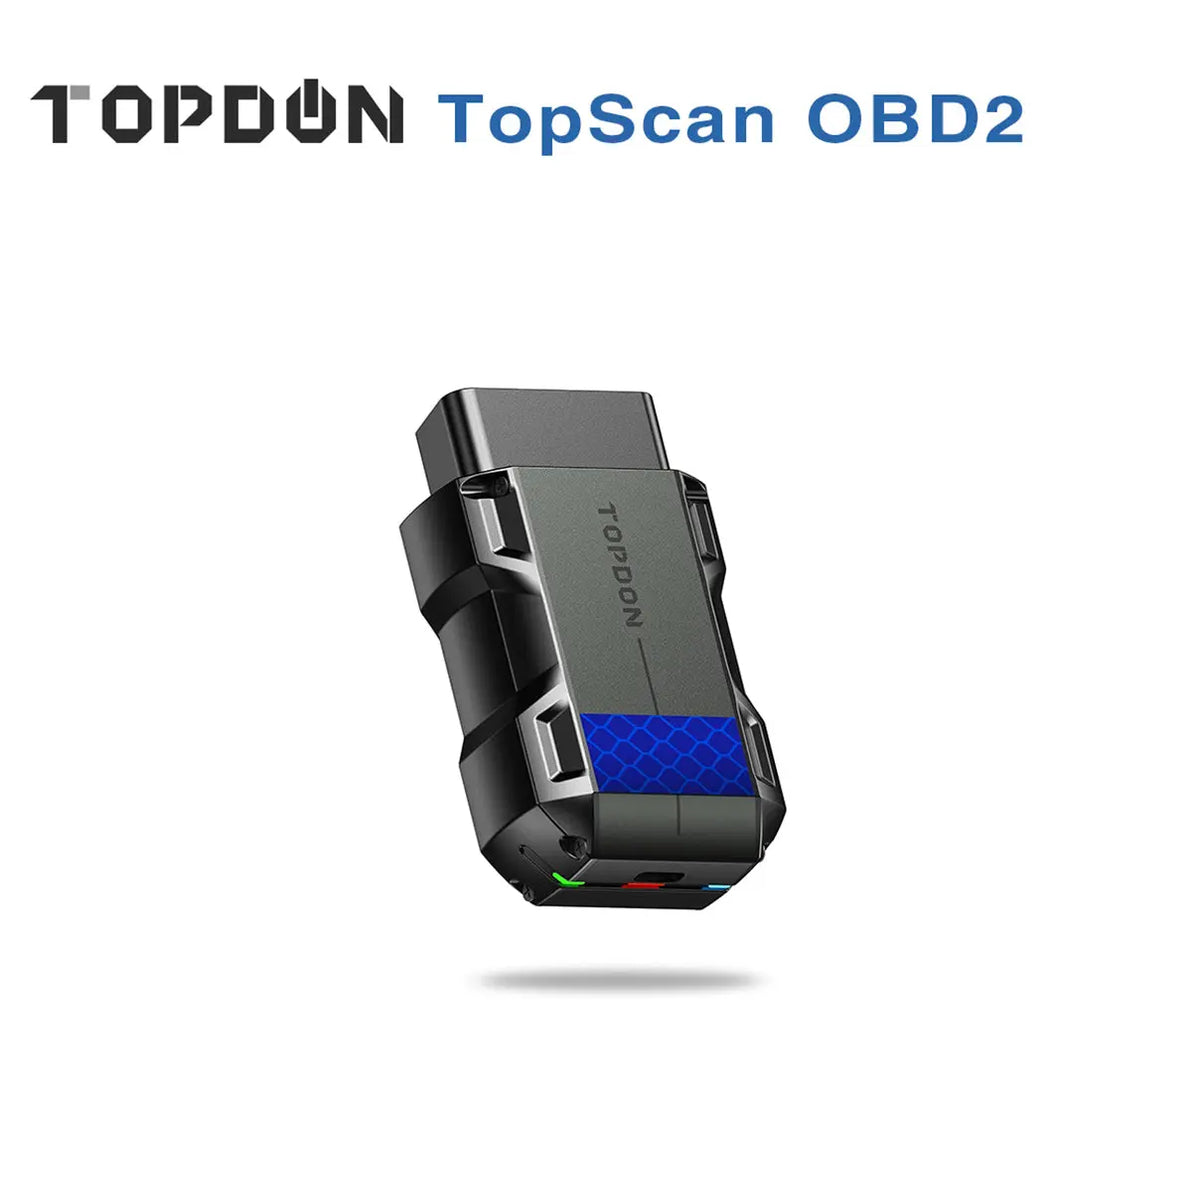 Topdon Topscan